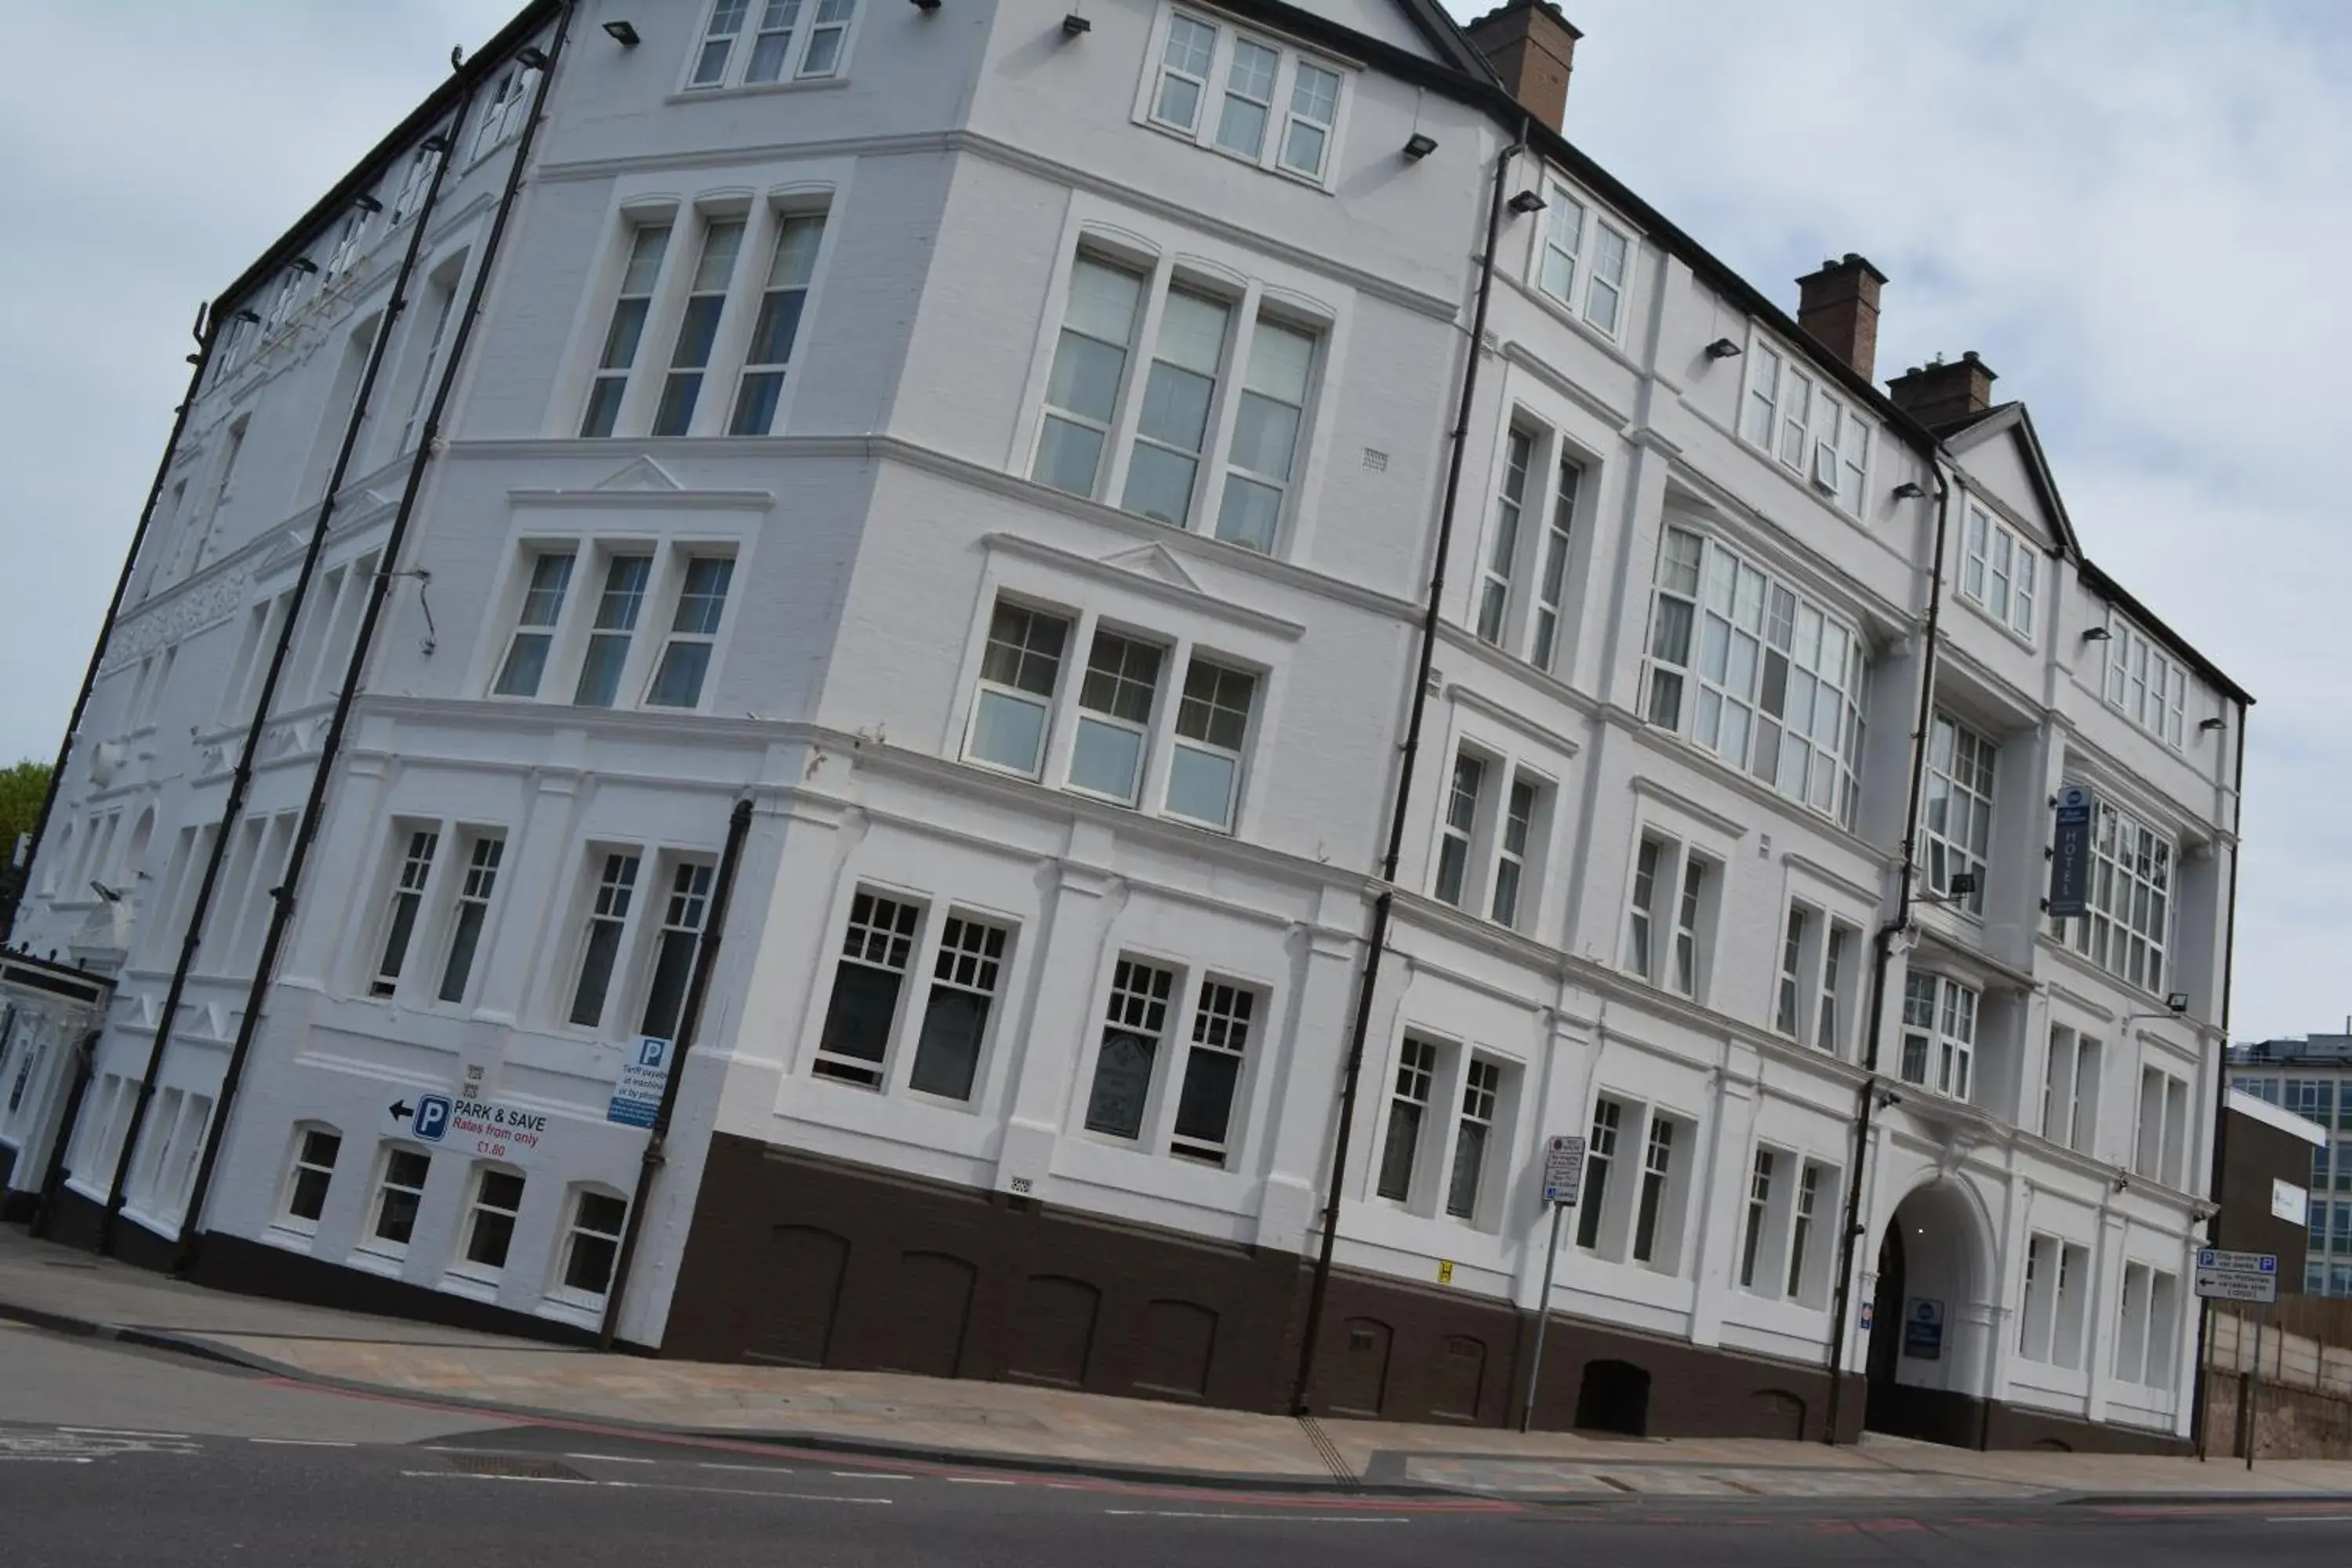 Property Building in Best Western Stoke on Trent City Centre Hotel